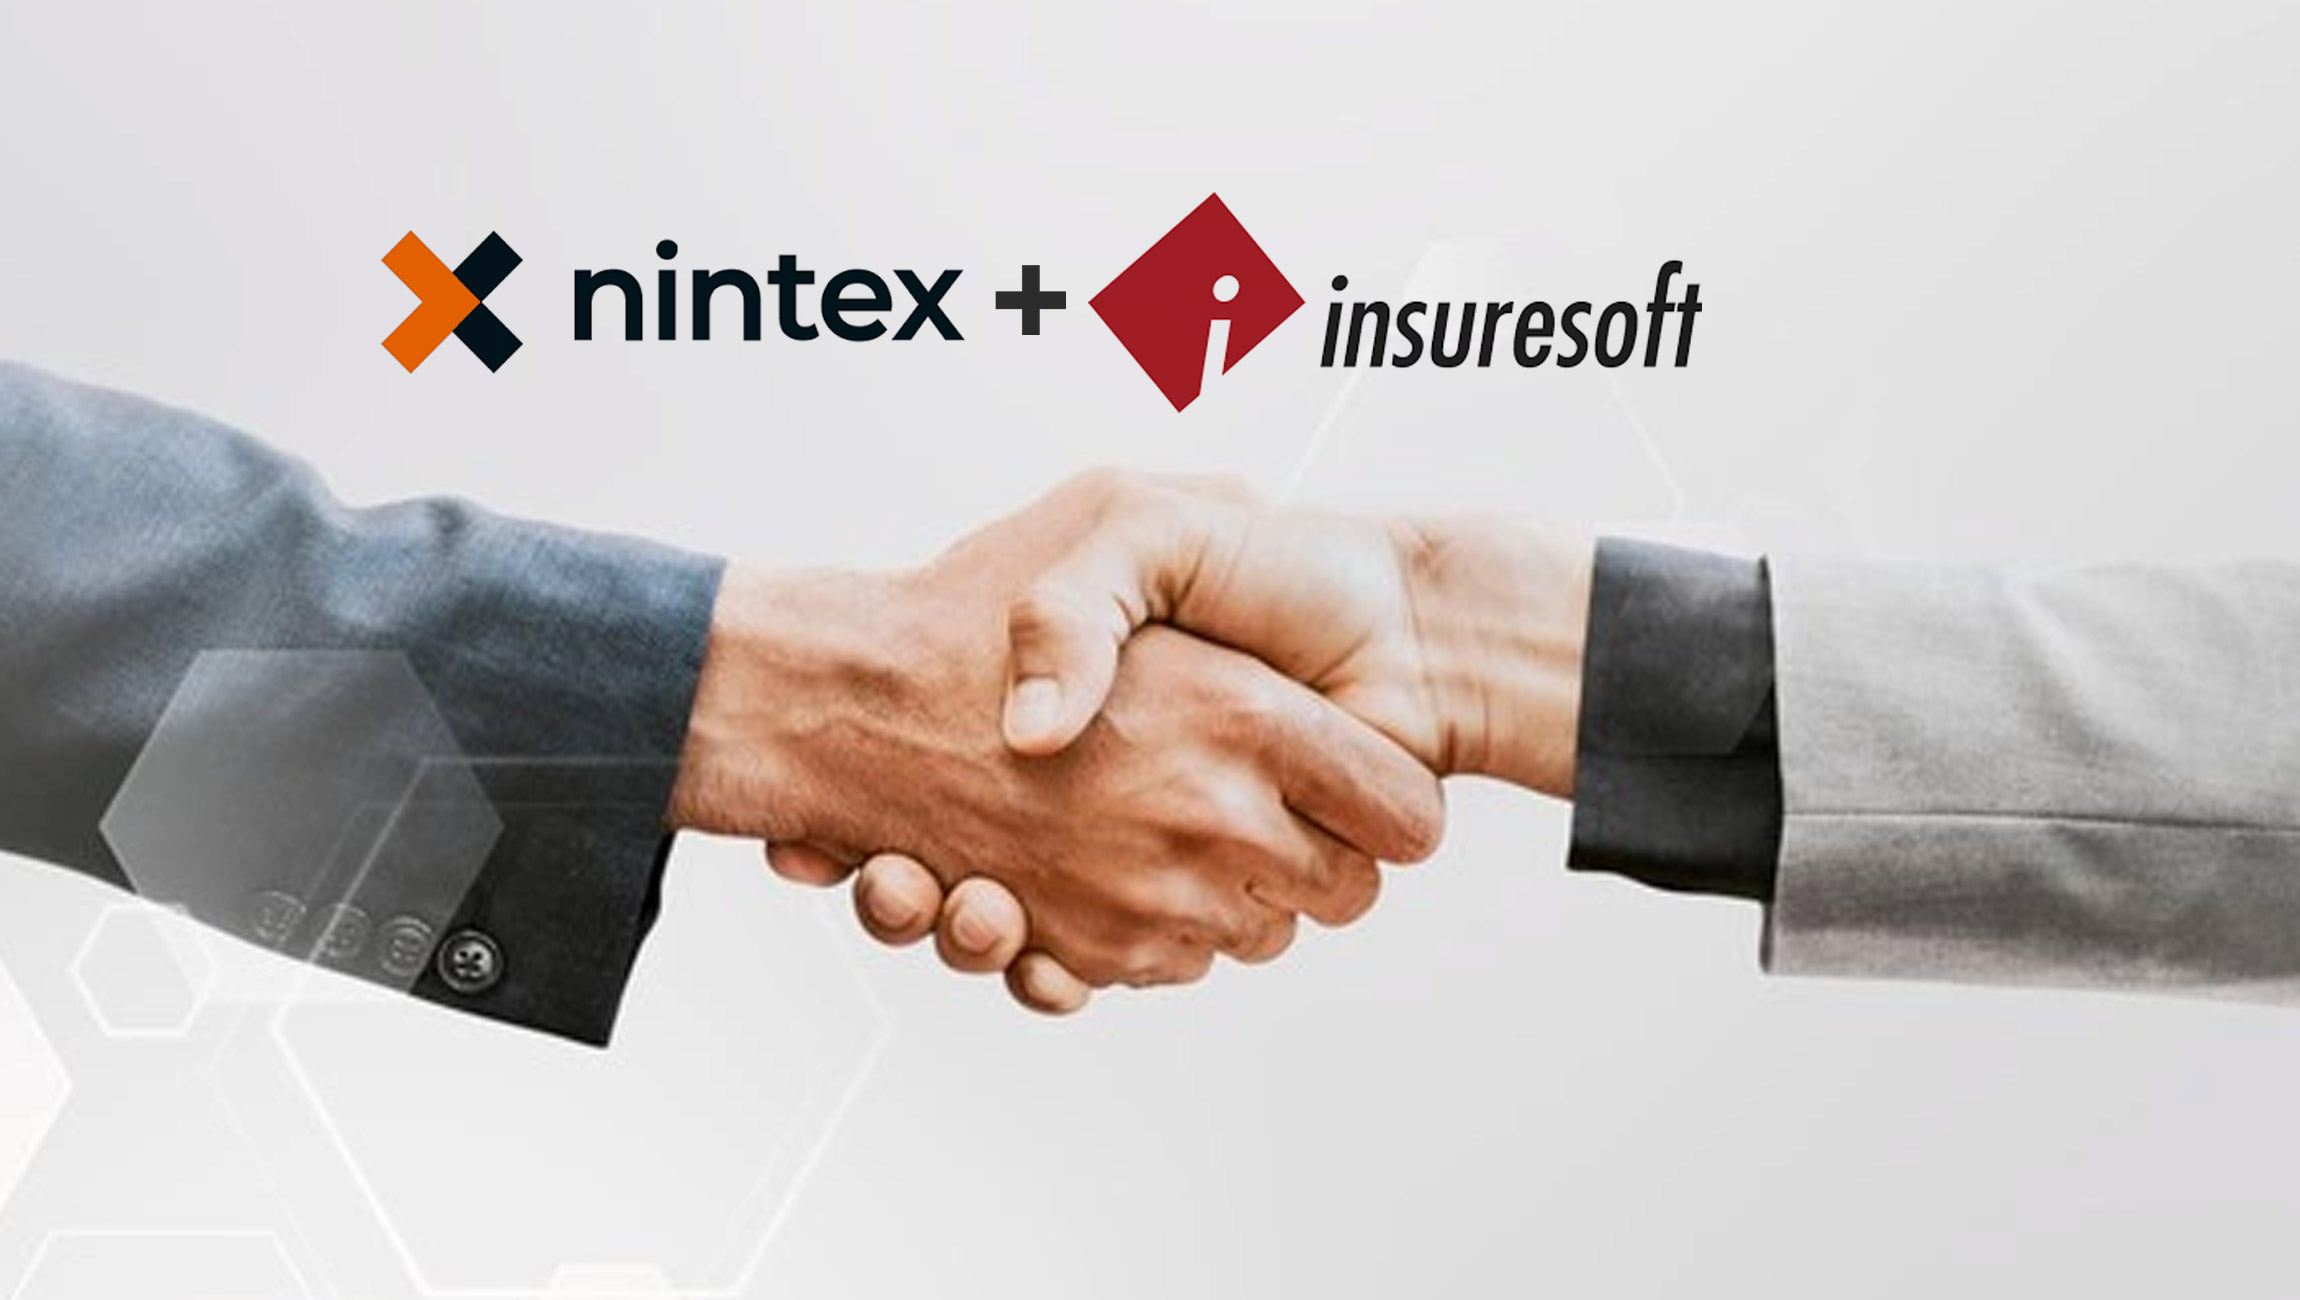 Nintex-and-Insuresoft-Partner-to-Accelerate-the-Digital-Transformation-of-the-Insurance-Industry